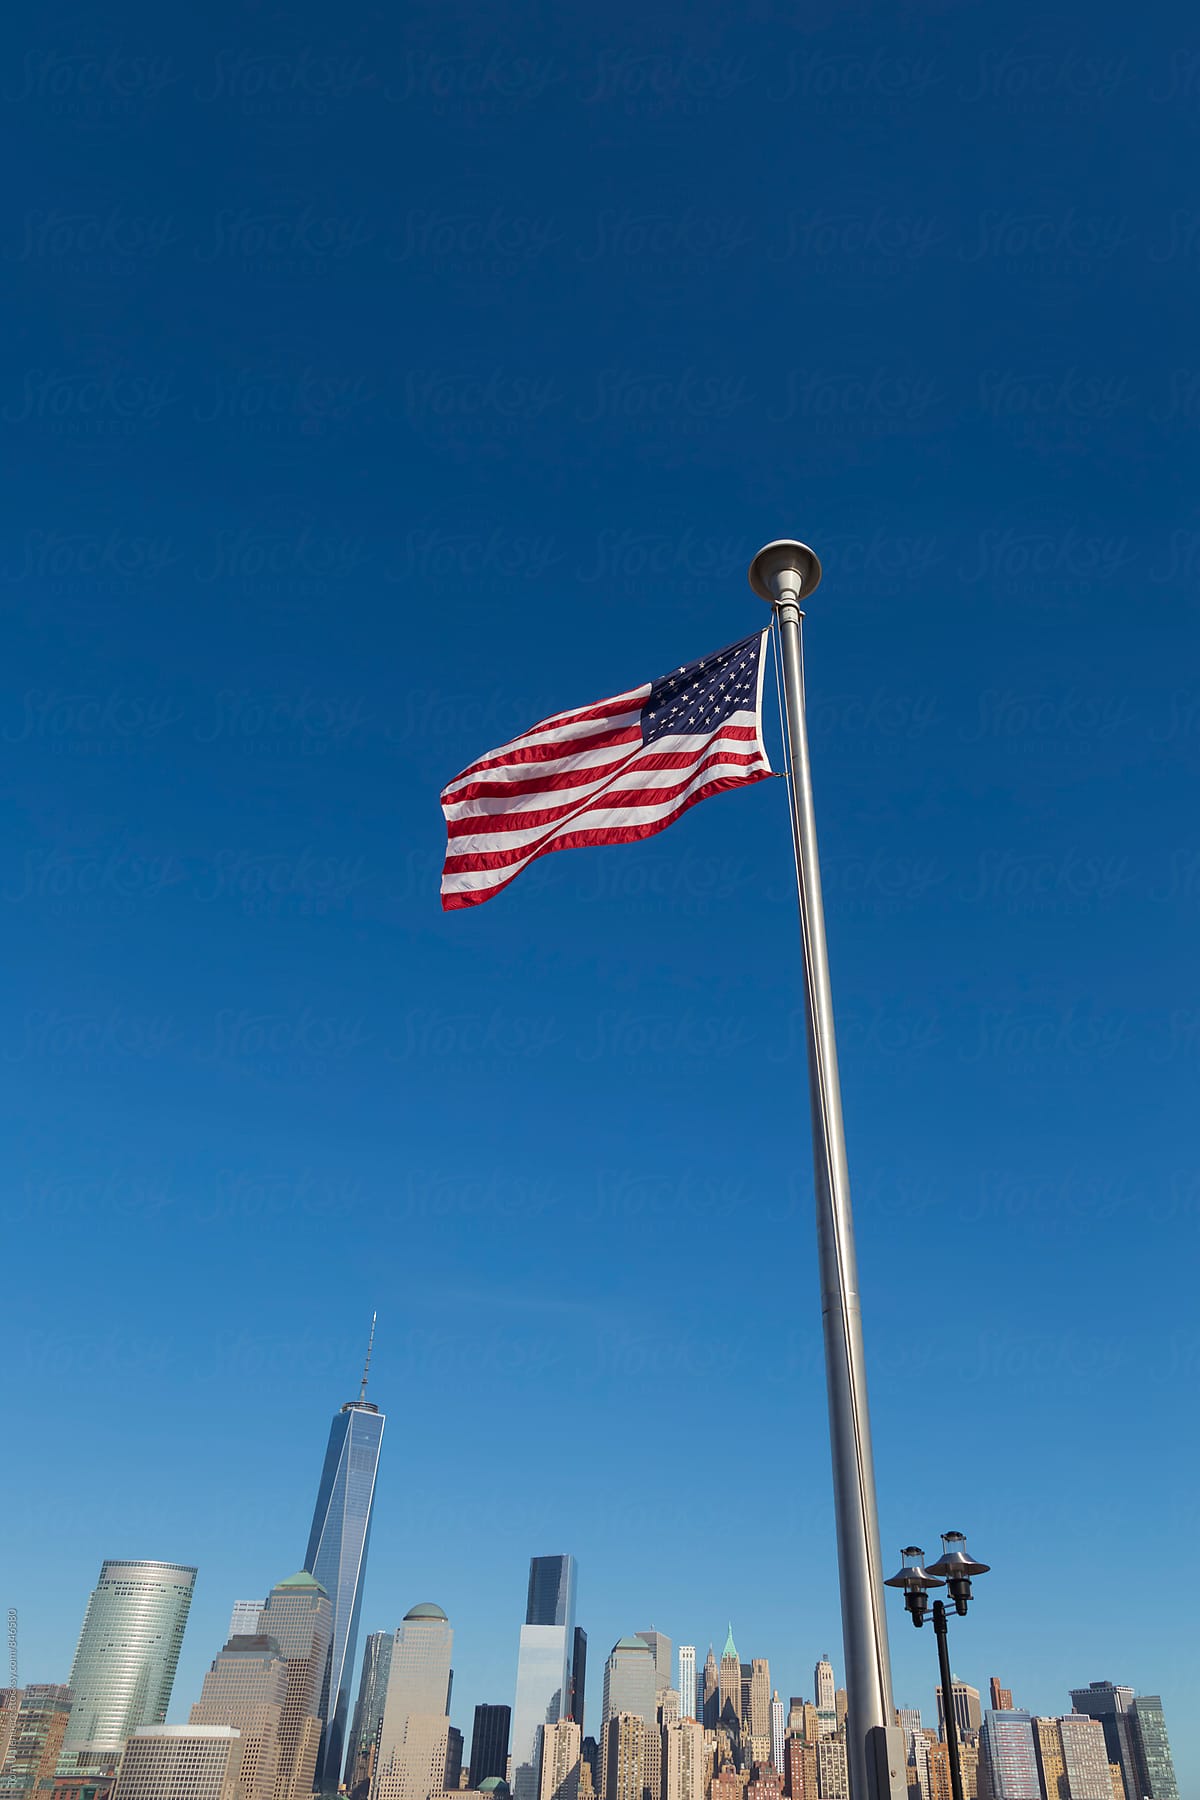 The American Flag and Lower Manhattan Skyline (New York), as seen from New Jersey